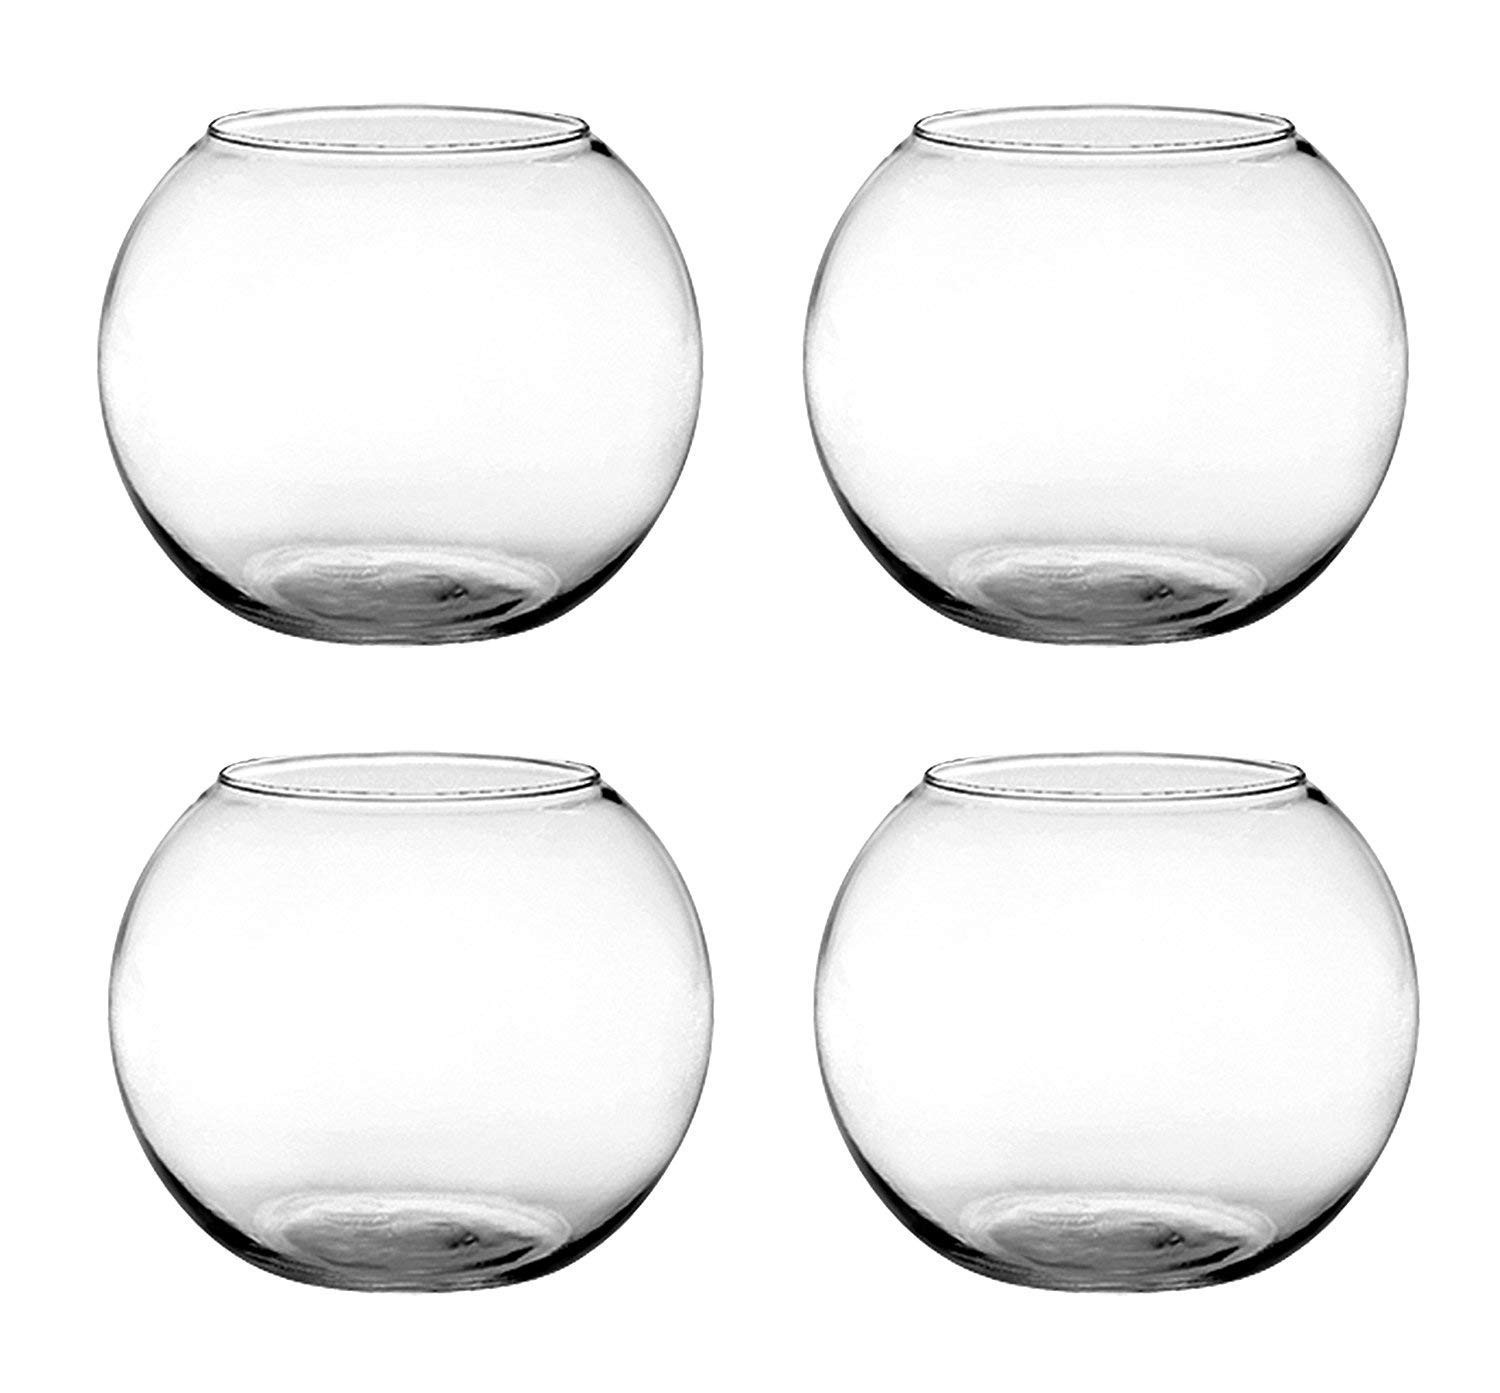 29 Stunning 8 Inch Square Glass Vase 2024 free download 8 inch square glass vase of amazon com floral supply online set of 4 6 rose bowls glass within amazon com floral supply online set of 4 6 rose bowls glass round vases for weddings events dec